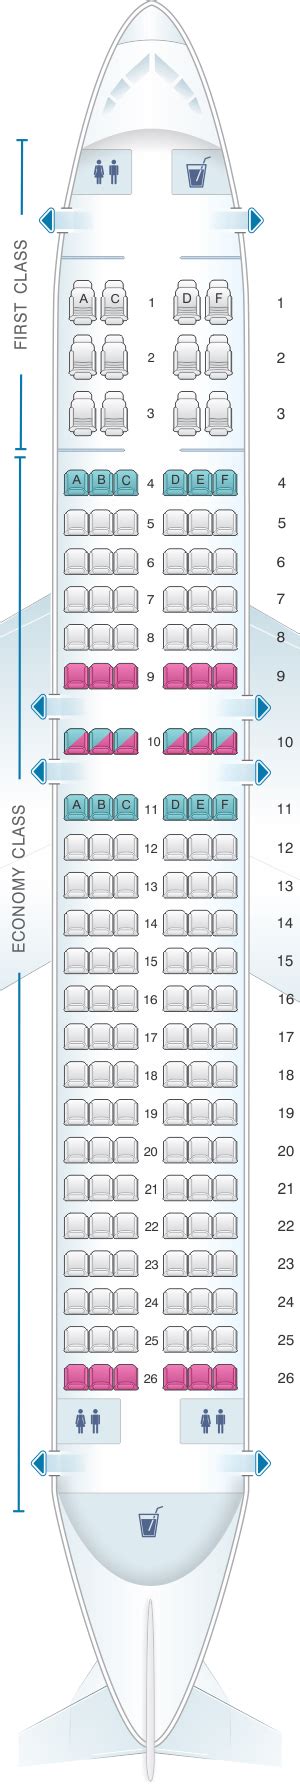 Overview. The American Airlines Airbus A321 (321) 181 passenger version is primarily used on Domestic US routes. This next-generation aircraft features a First Class cabin with 16 recliner-style seats. The Main Cabin features 165 standard Economy Class-style seats arranged in a 3-3 configuration.. 